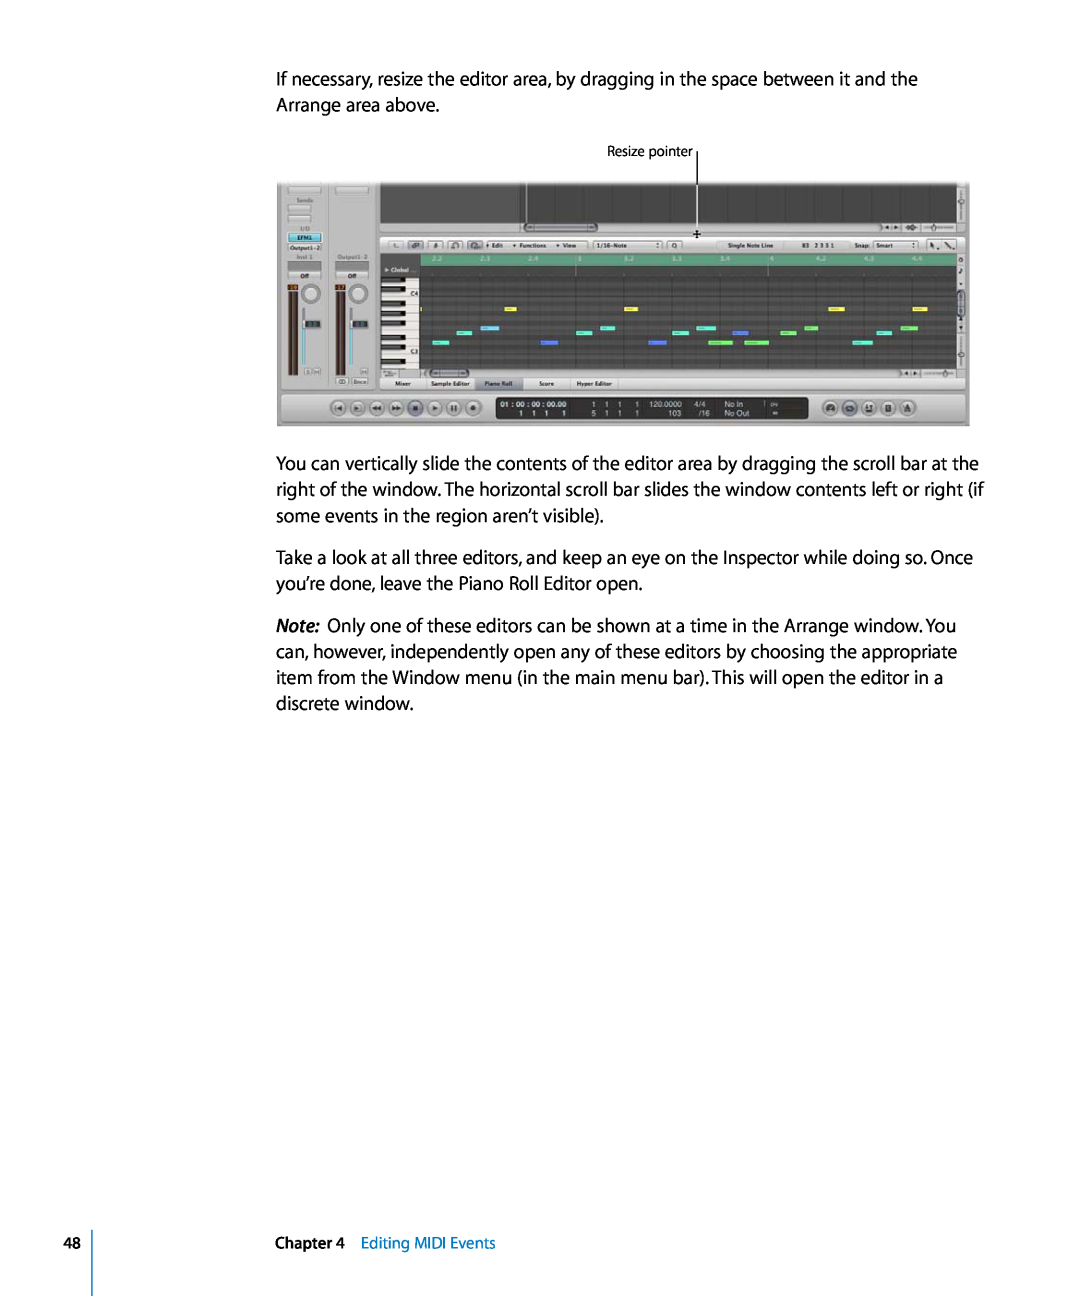 Apple 8 manual Editing MIDI Events, Resize pointer 